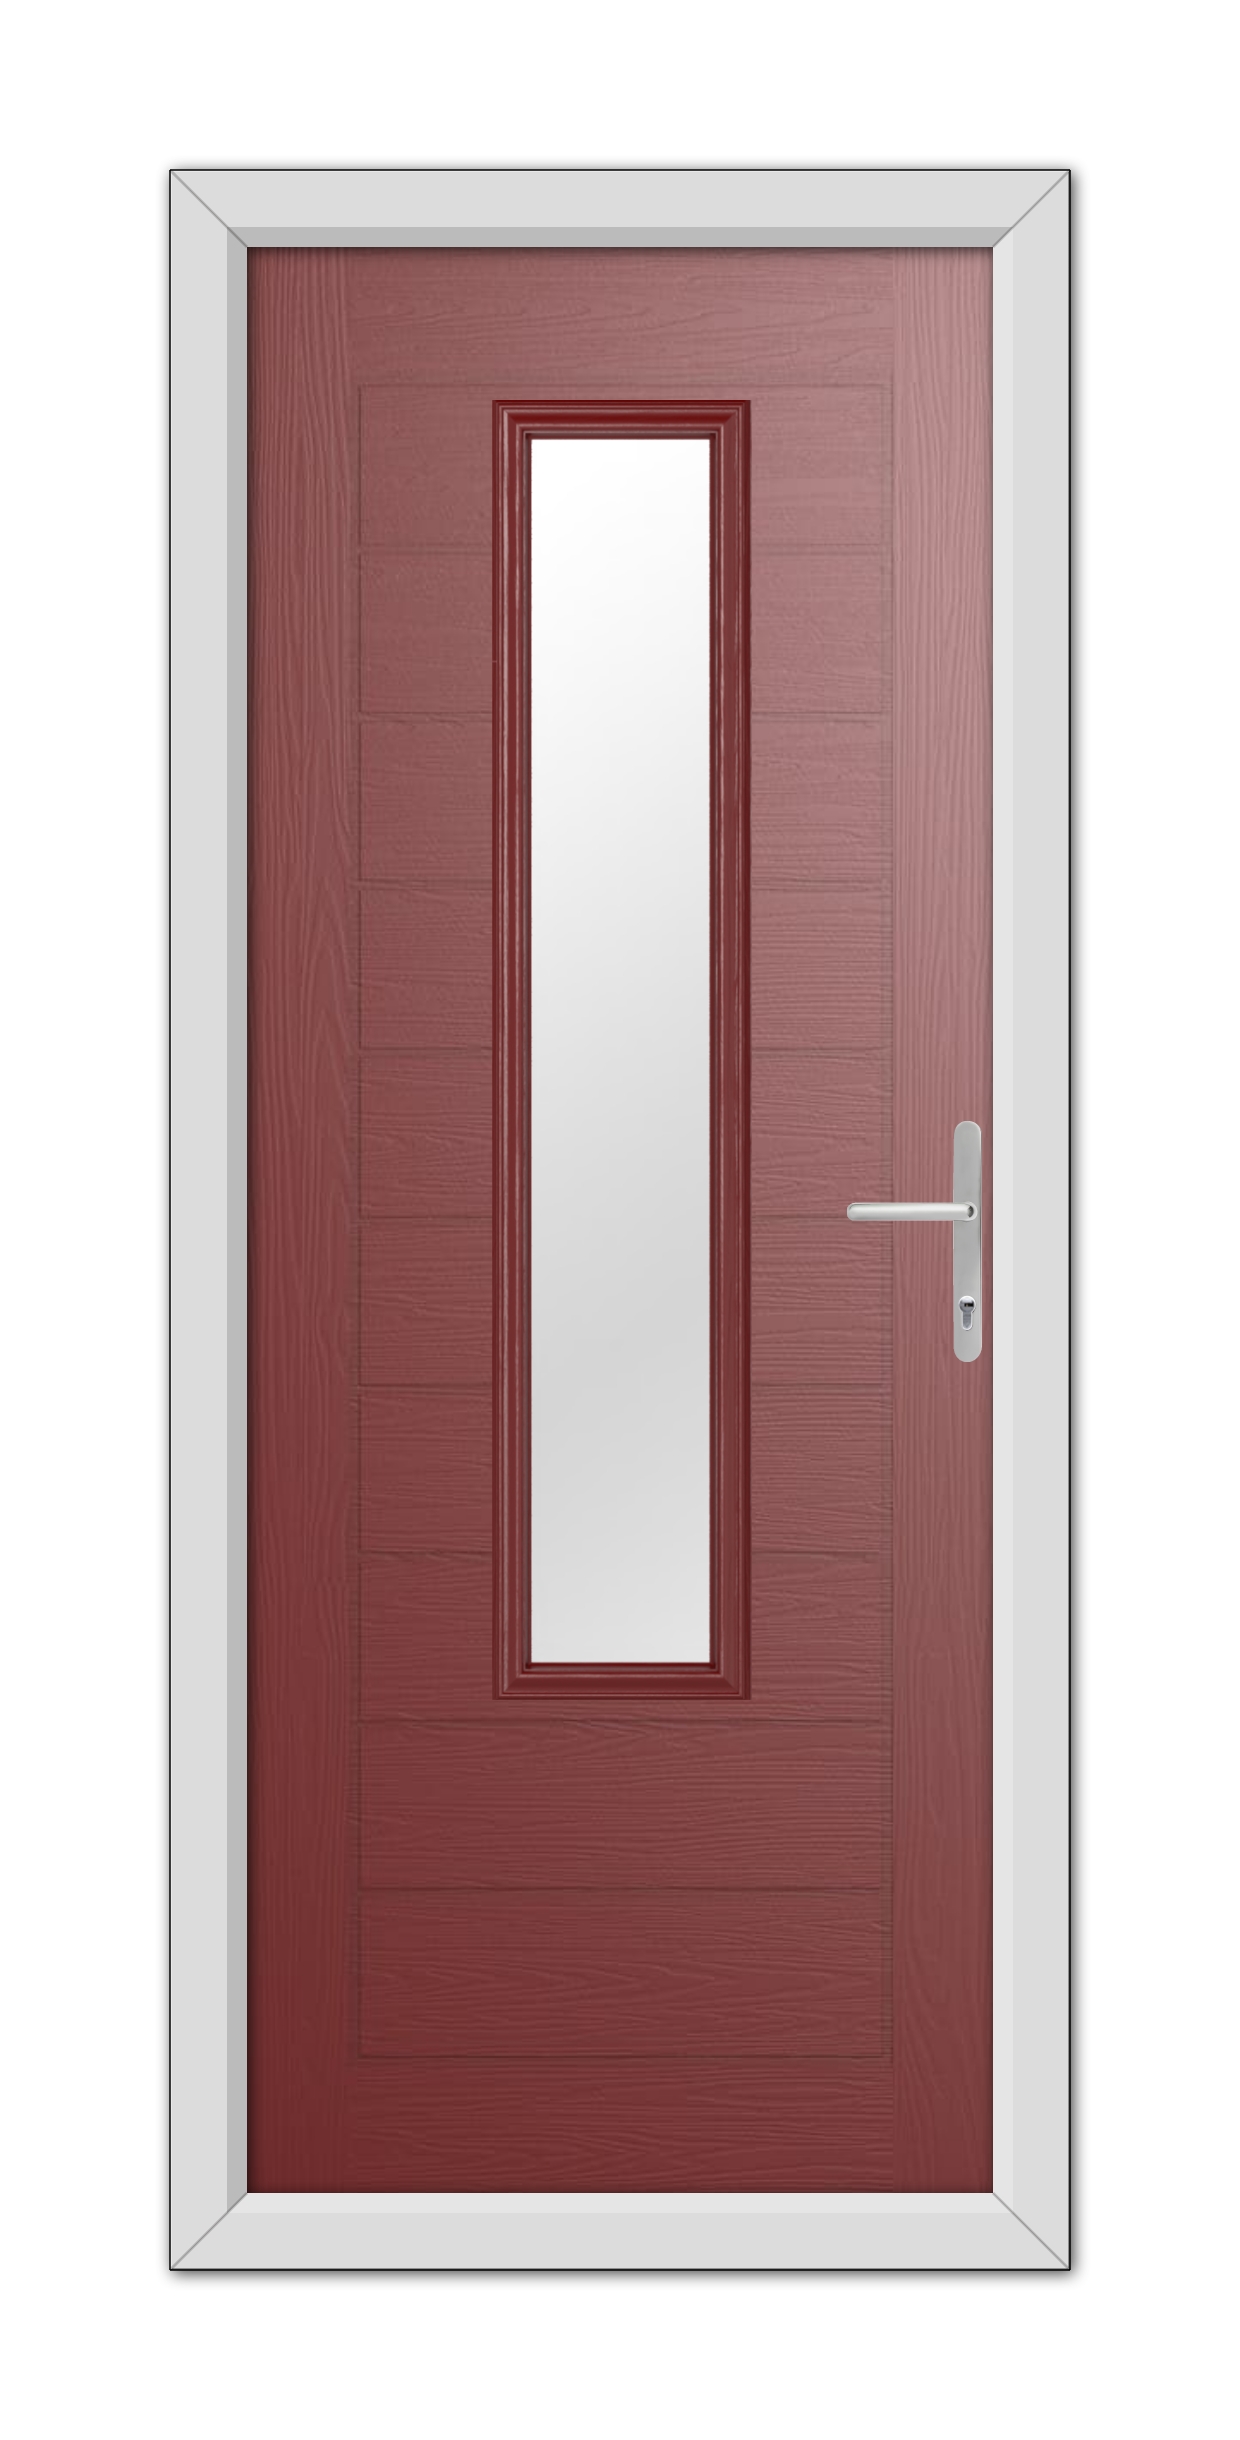 Red Bedford Composite Door 48mm Timber Core with a vertical, rectangular window and a white handle, set in a white frame.